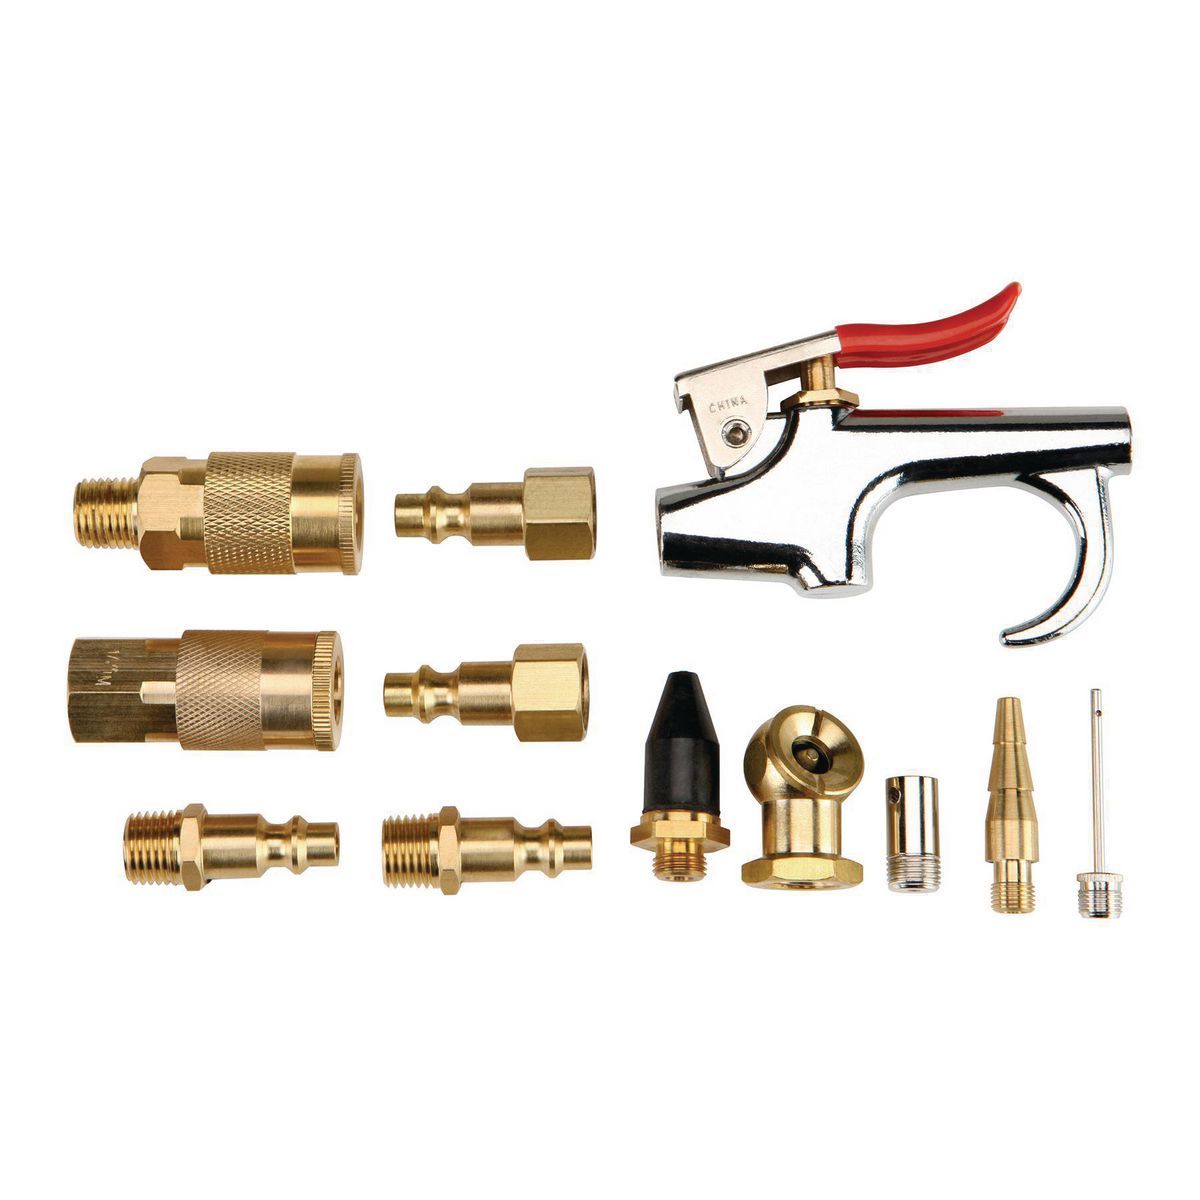 CENTRAL PNEUMATIC Brass Air Tool Accessory Kit, 12 Piece